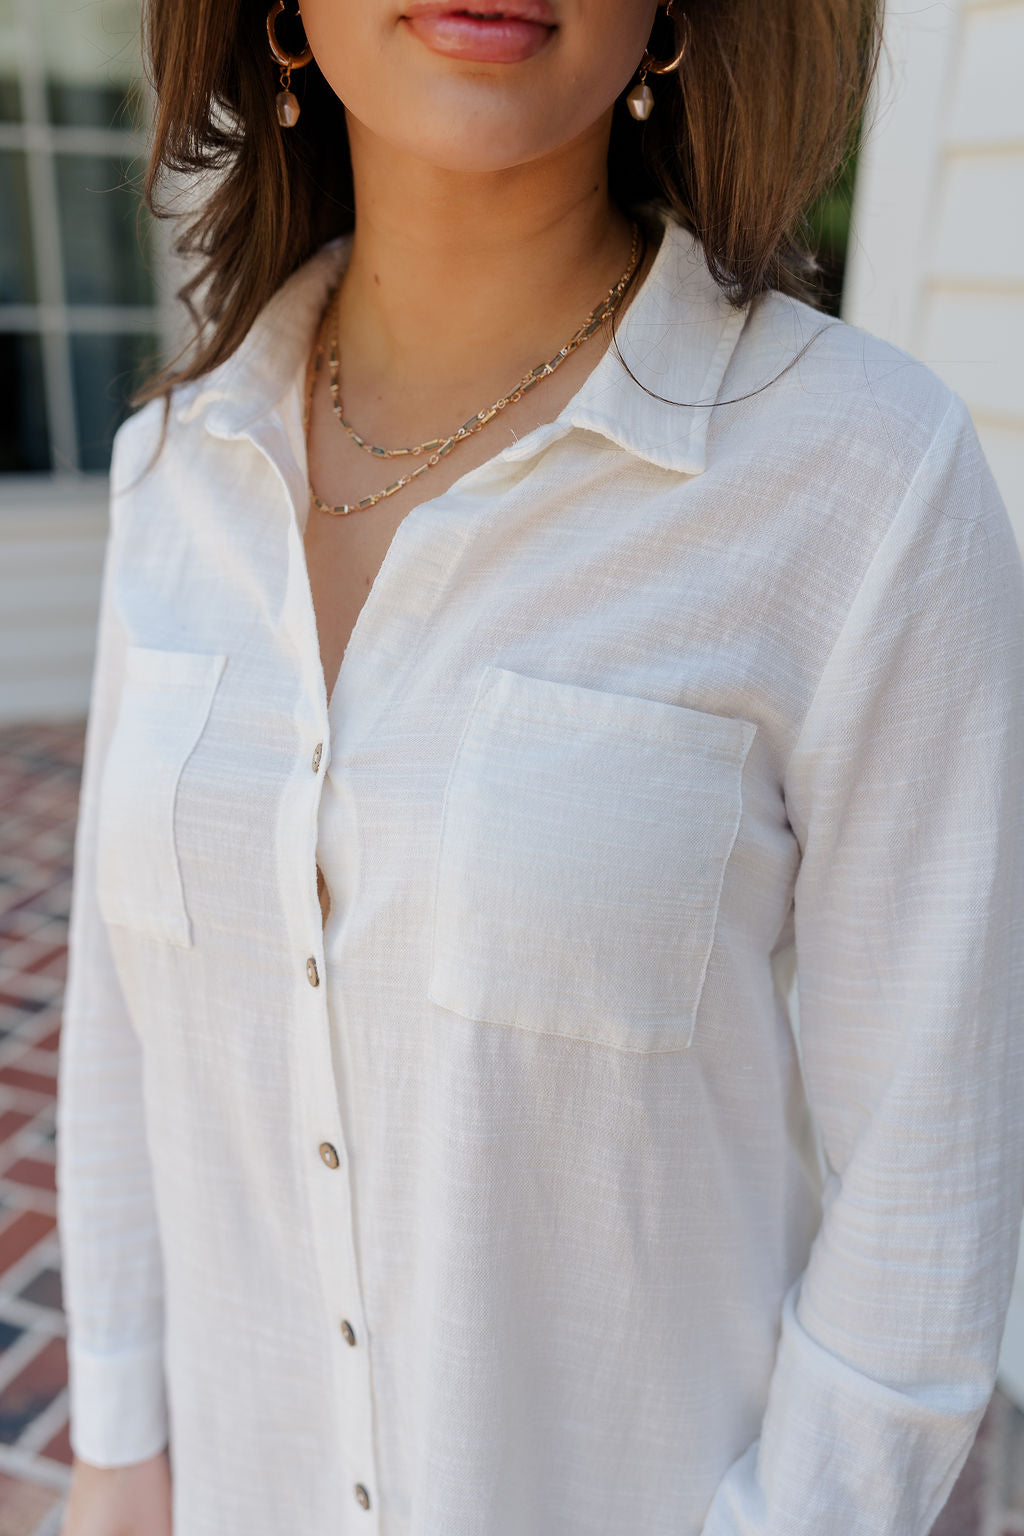 Close-up side frontal view of female model wearing the Everly White Button Up Midi Dress that has white fabric, long sleeves, a button up front, collar, chest pockets, and a frayed high-low hemline with back slit.